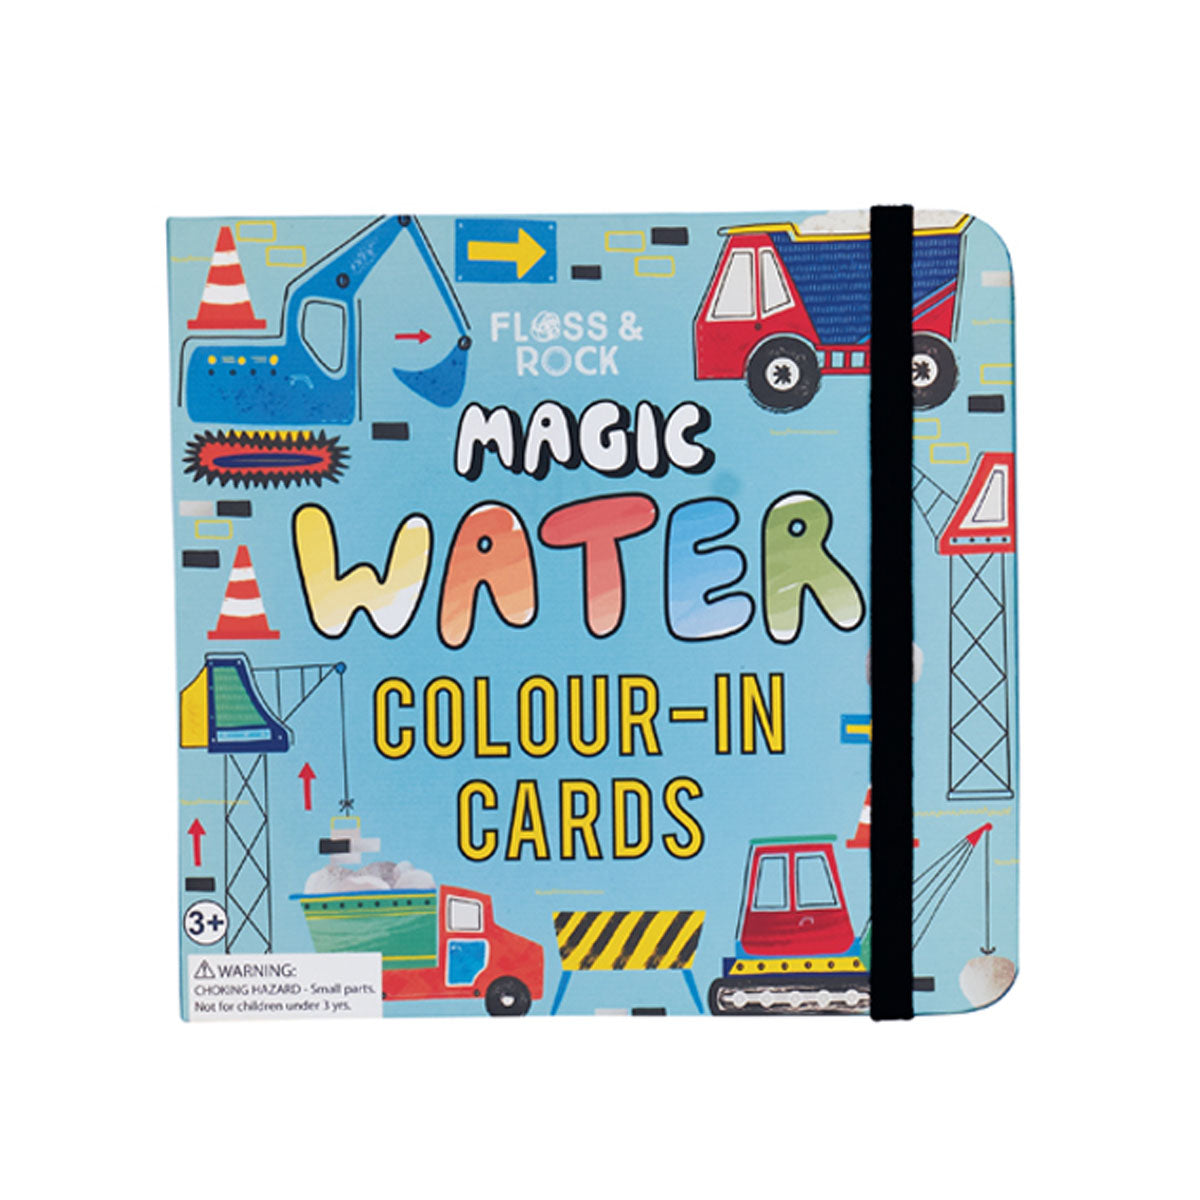 Magic Colour Changing Water Cards Construction